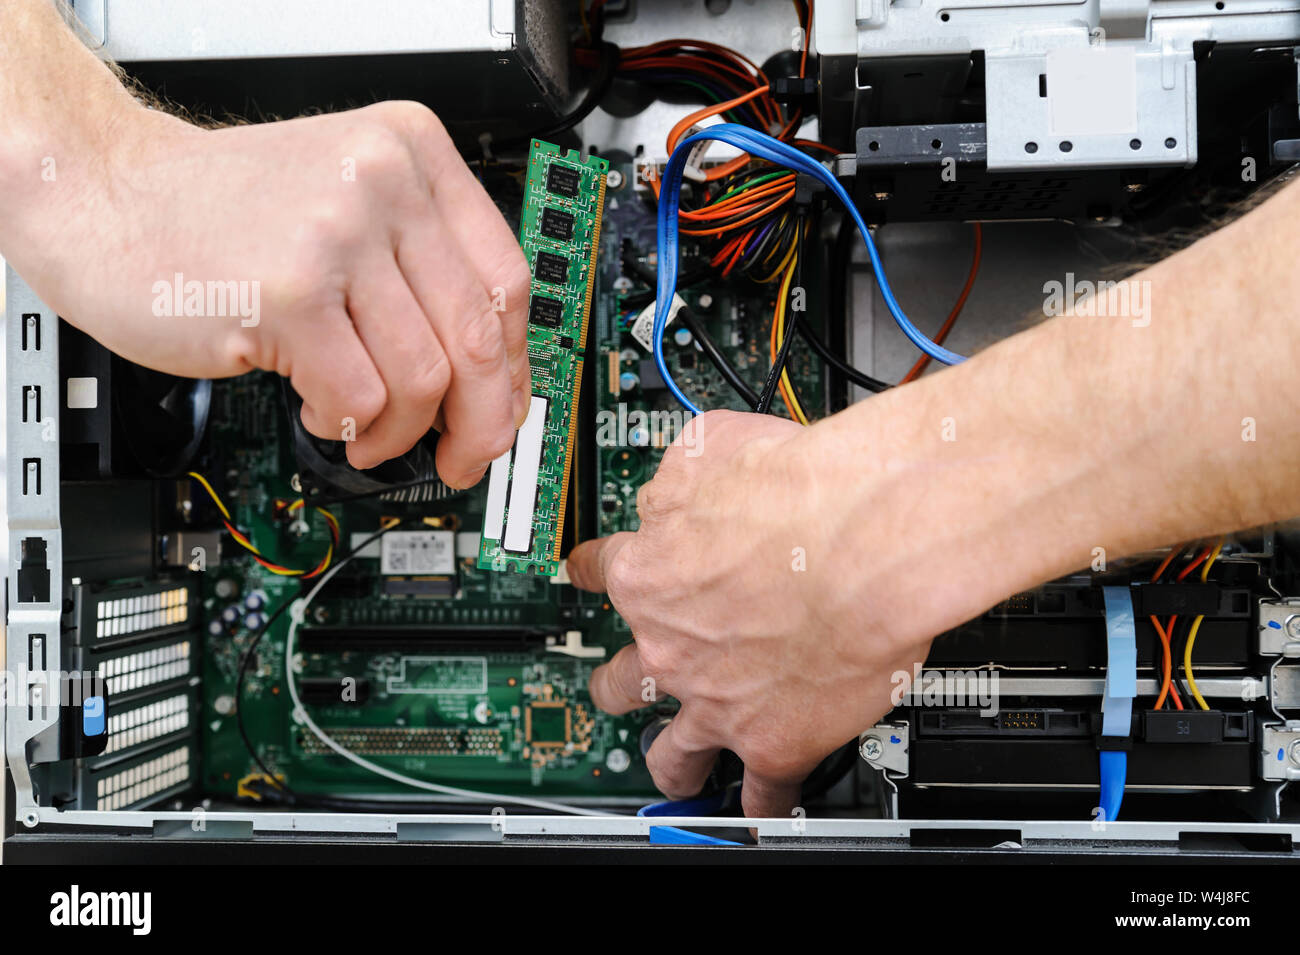 A man is holding a RAM slot to upgrade of the computer. Stock Photo